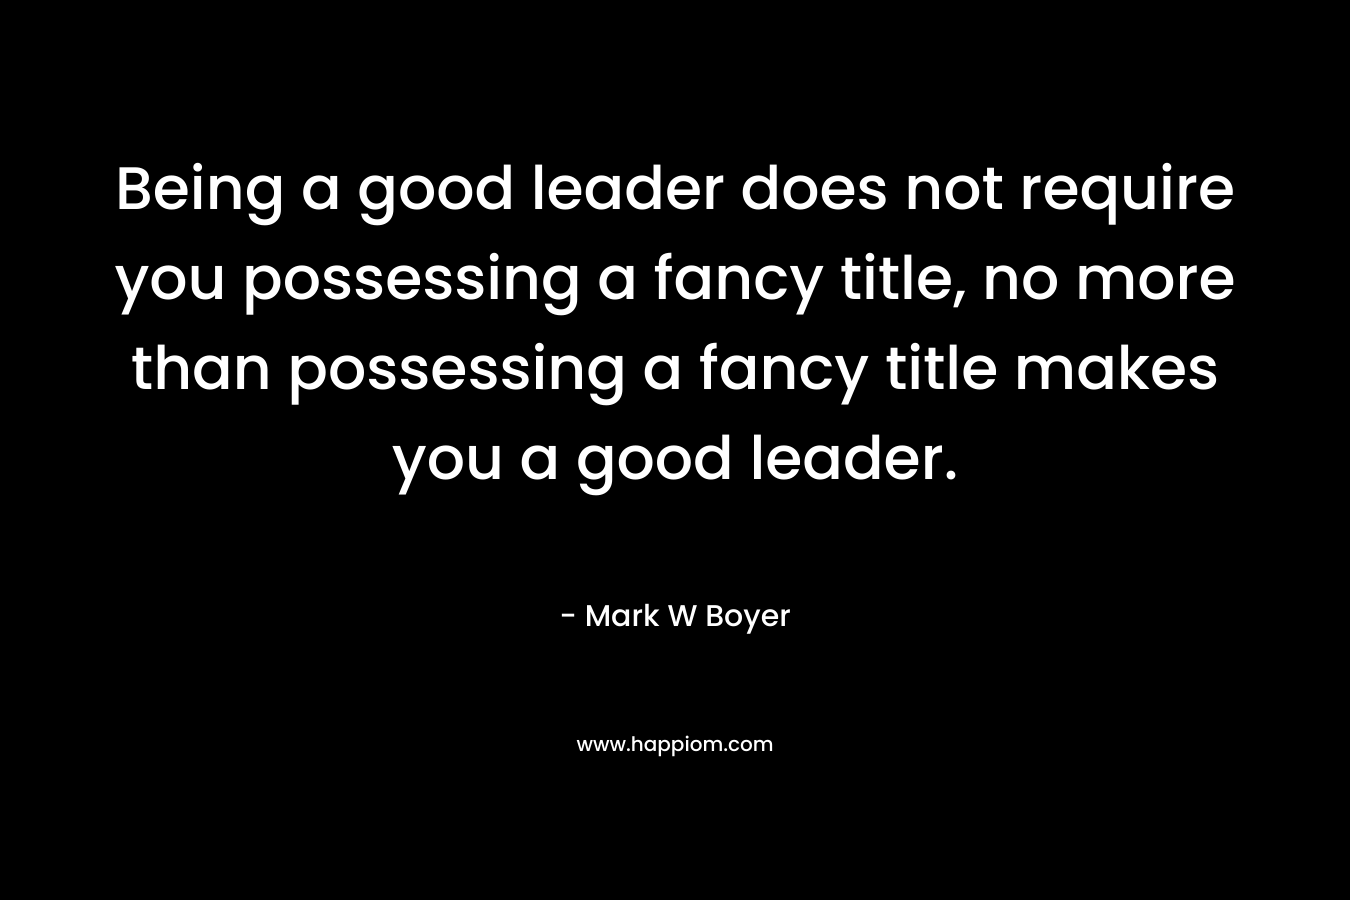 Being a good leader does not require you possessing a fancy title, no more than possessing a fancy title makes you a good leader. – Mark W Boyer